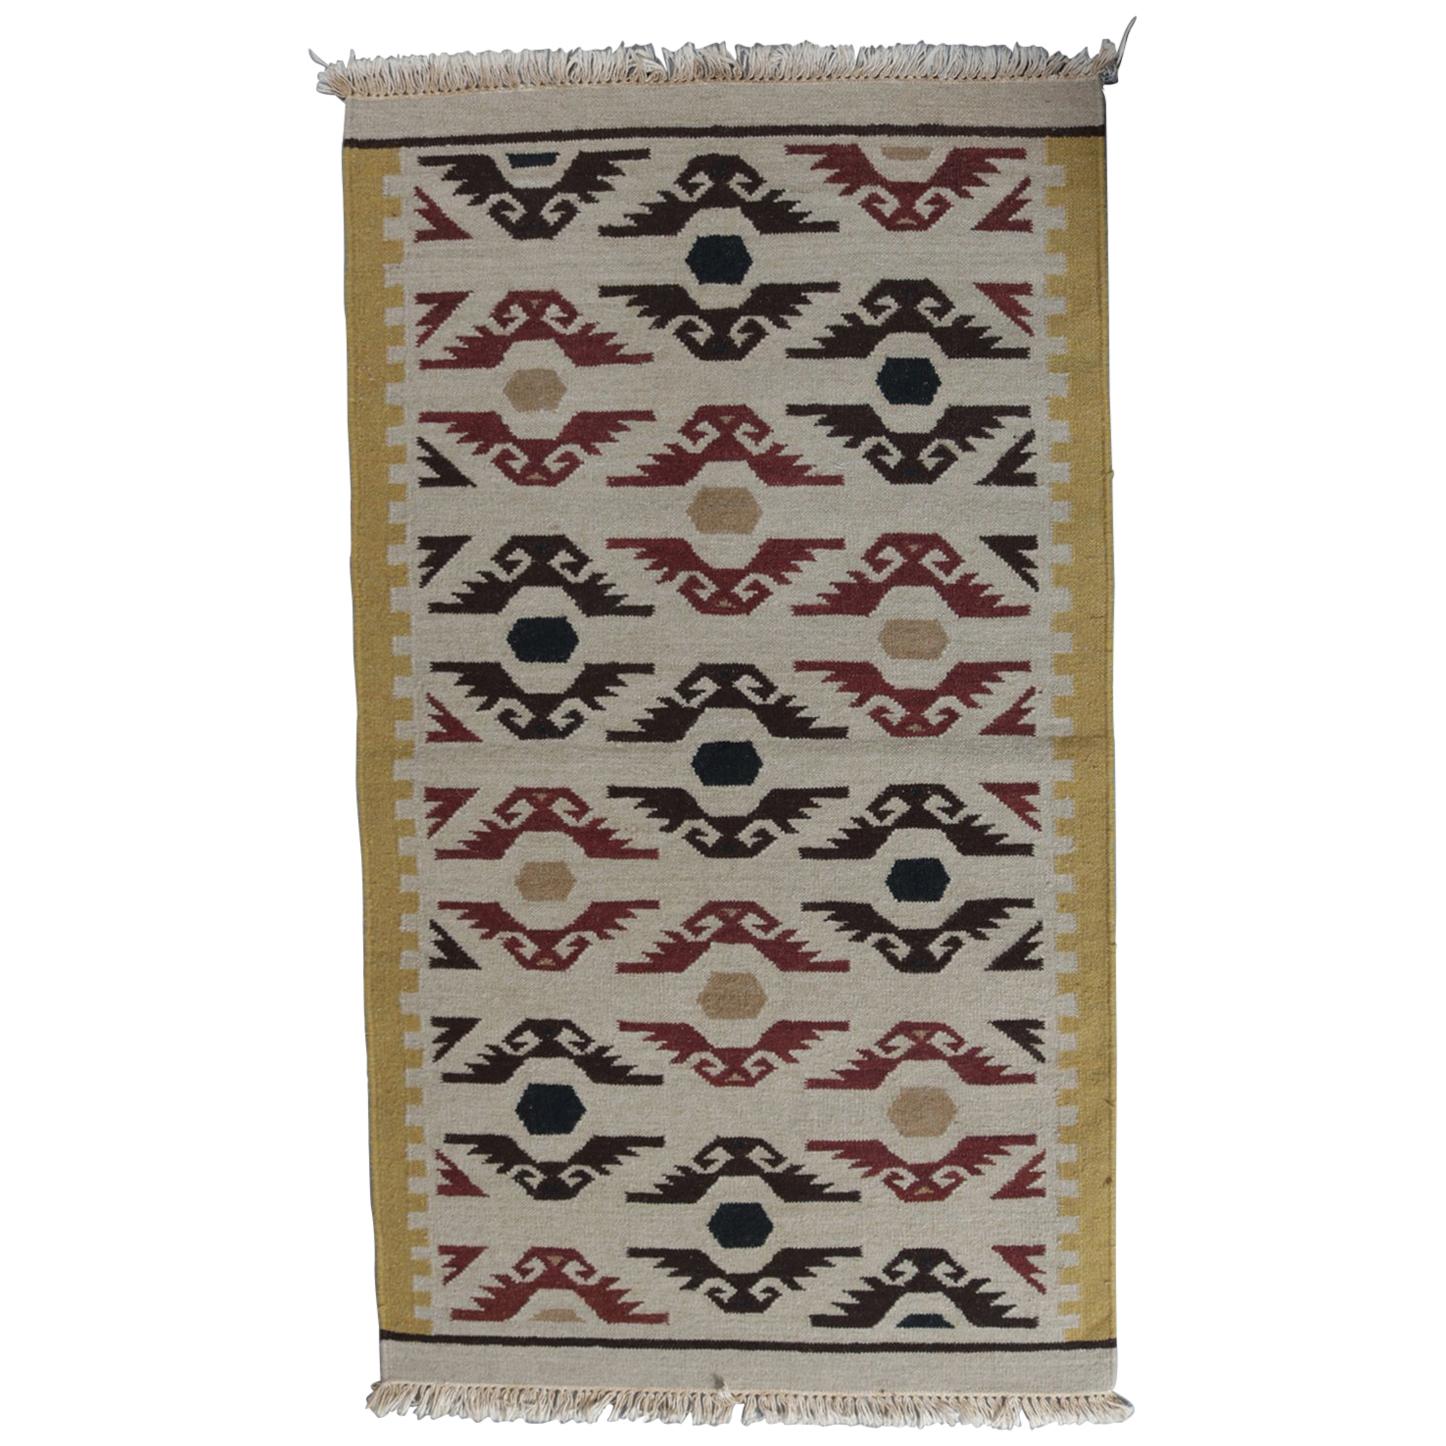 Native American Indian Navajo Style Area Rug, Stylized Eagles, 20th Century